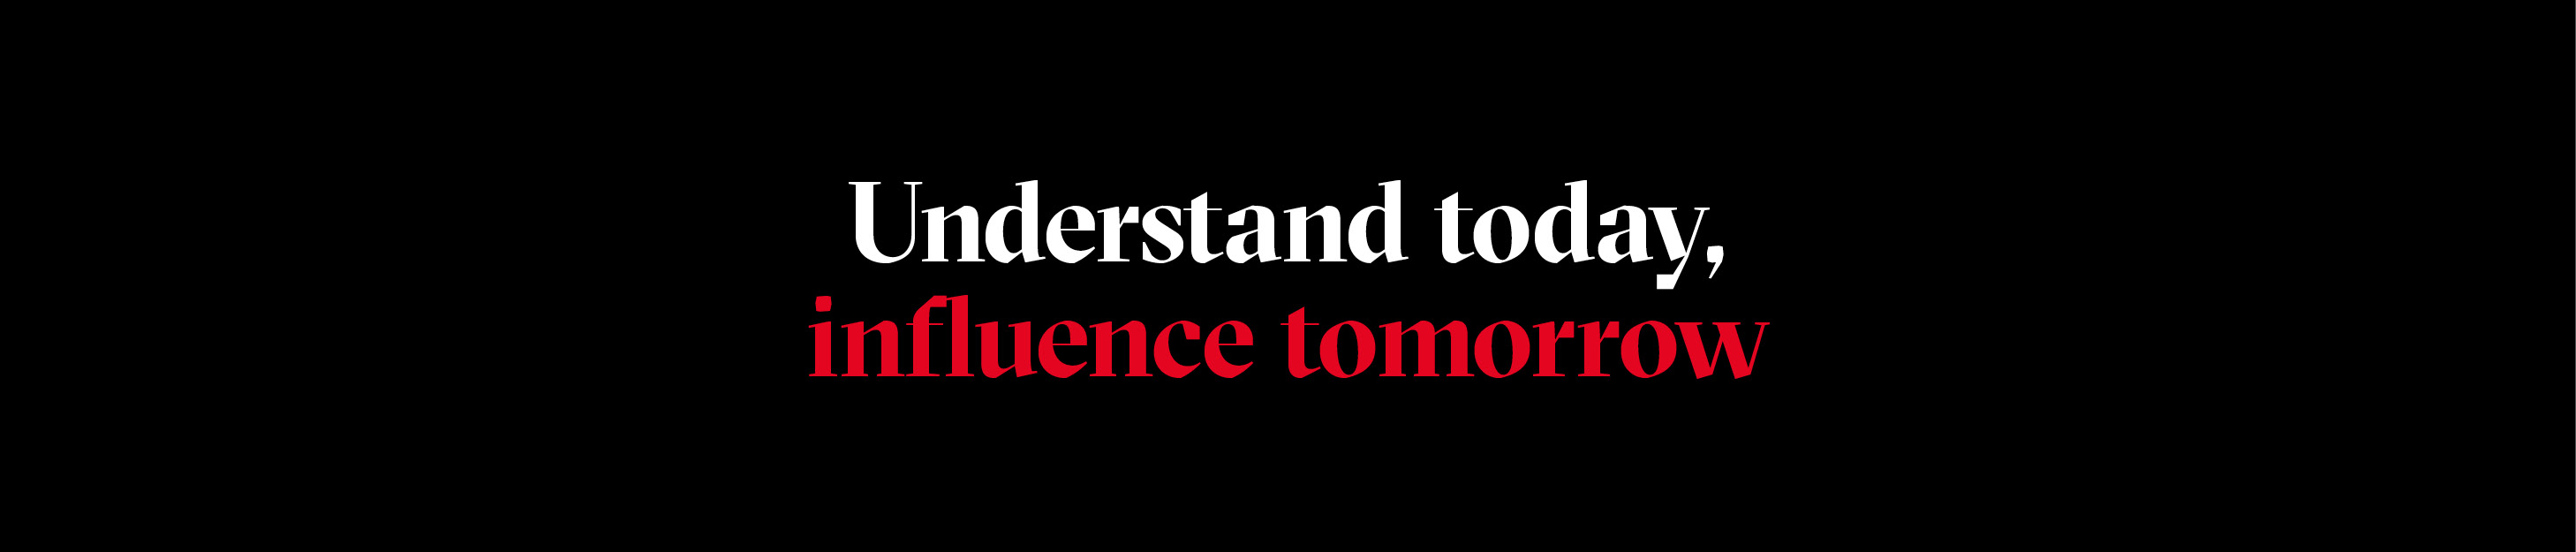 Understand today, influence tomorrow